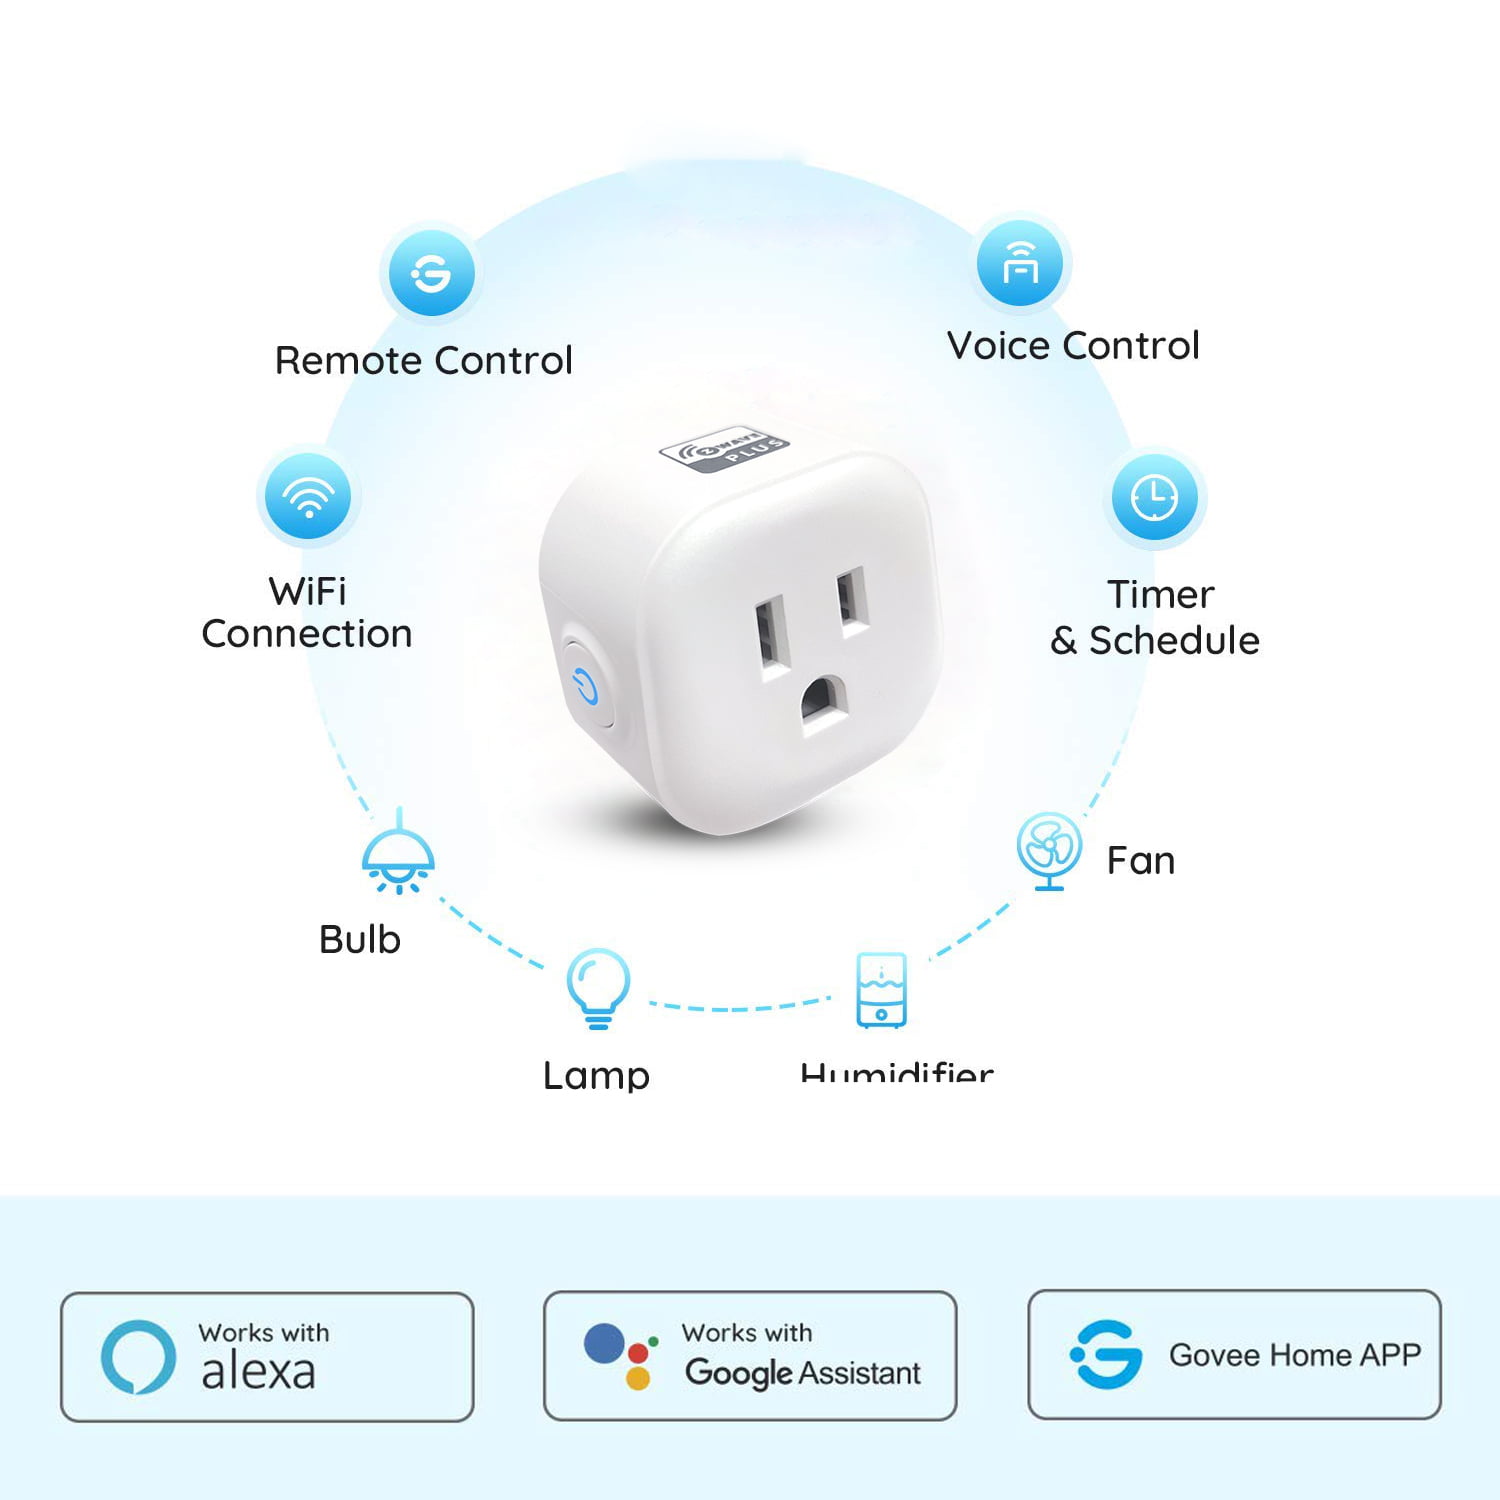 Govee Dual Smart Plug 4 Pack, 15A WiFi Bluetooth Outlet, Work with Alexa  and Google Assistant, 2-in-1 Compact Design, Govee Home App Control  Remotely